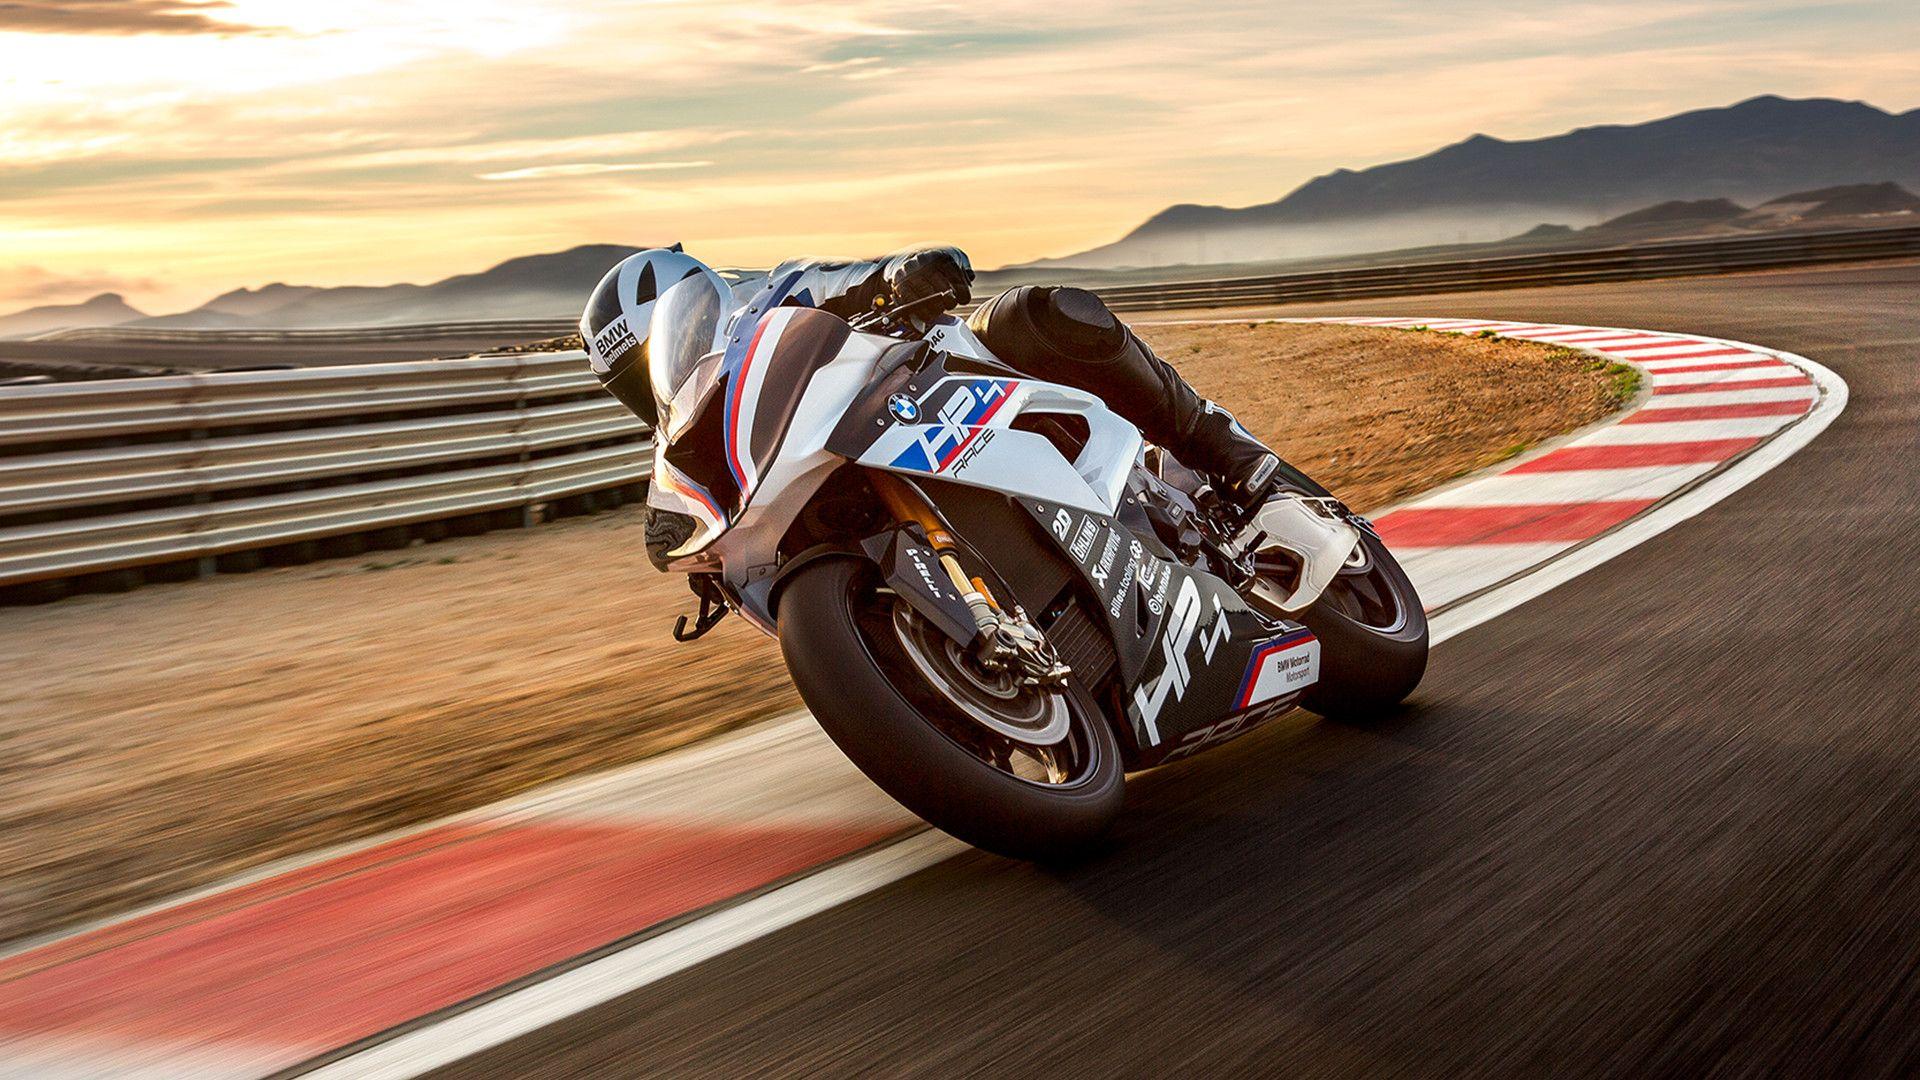 BMW S1000RR HP Race Edition on track at sunset